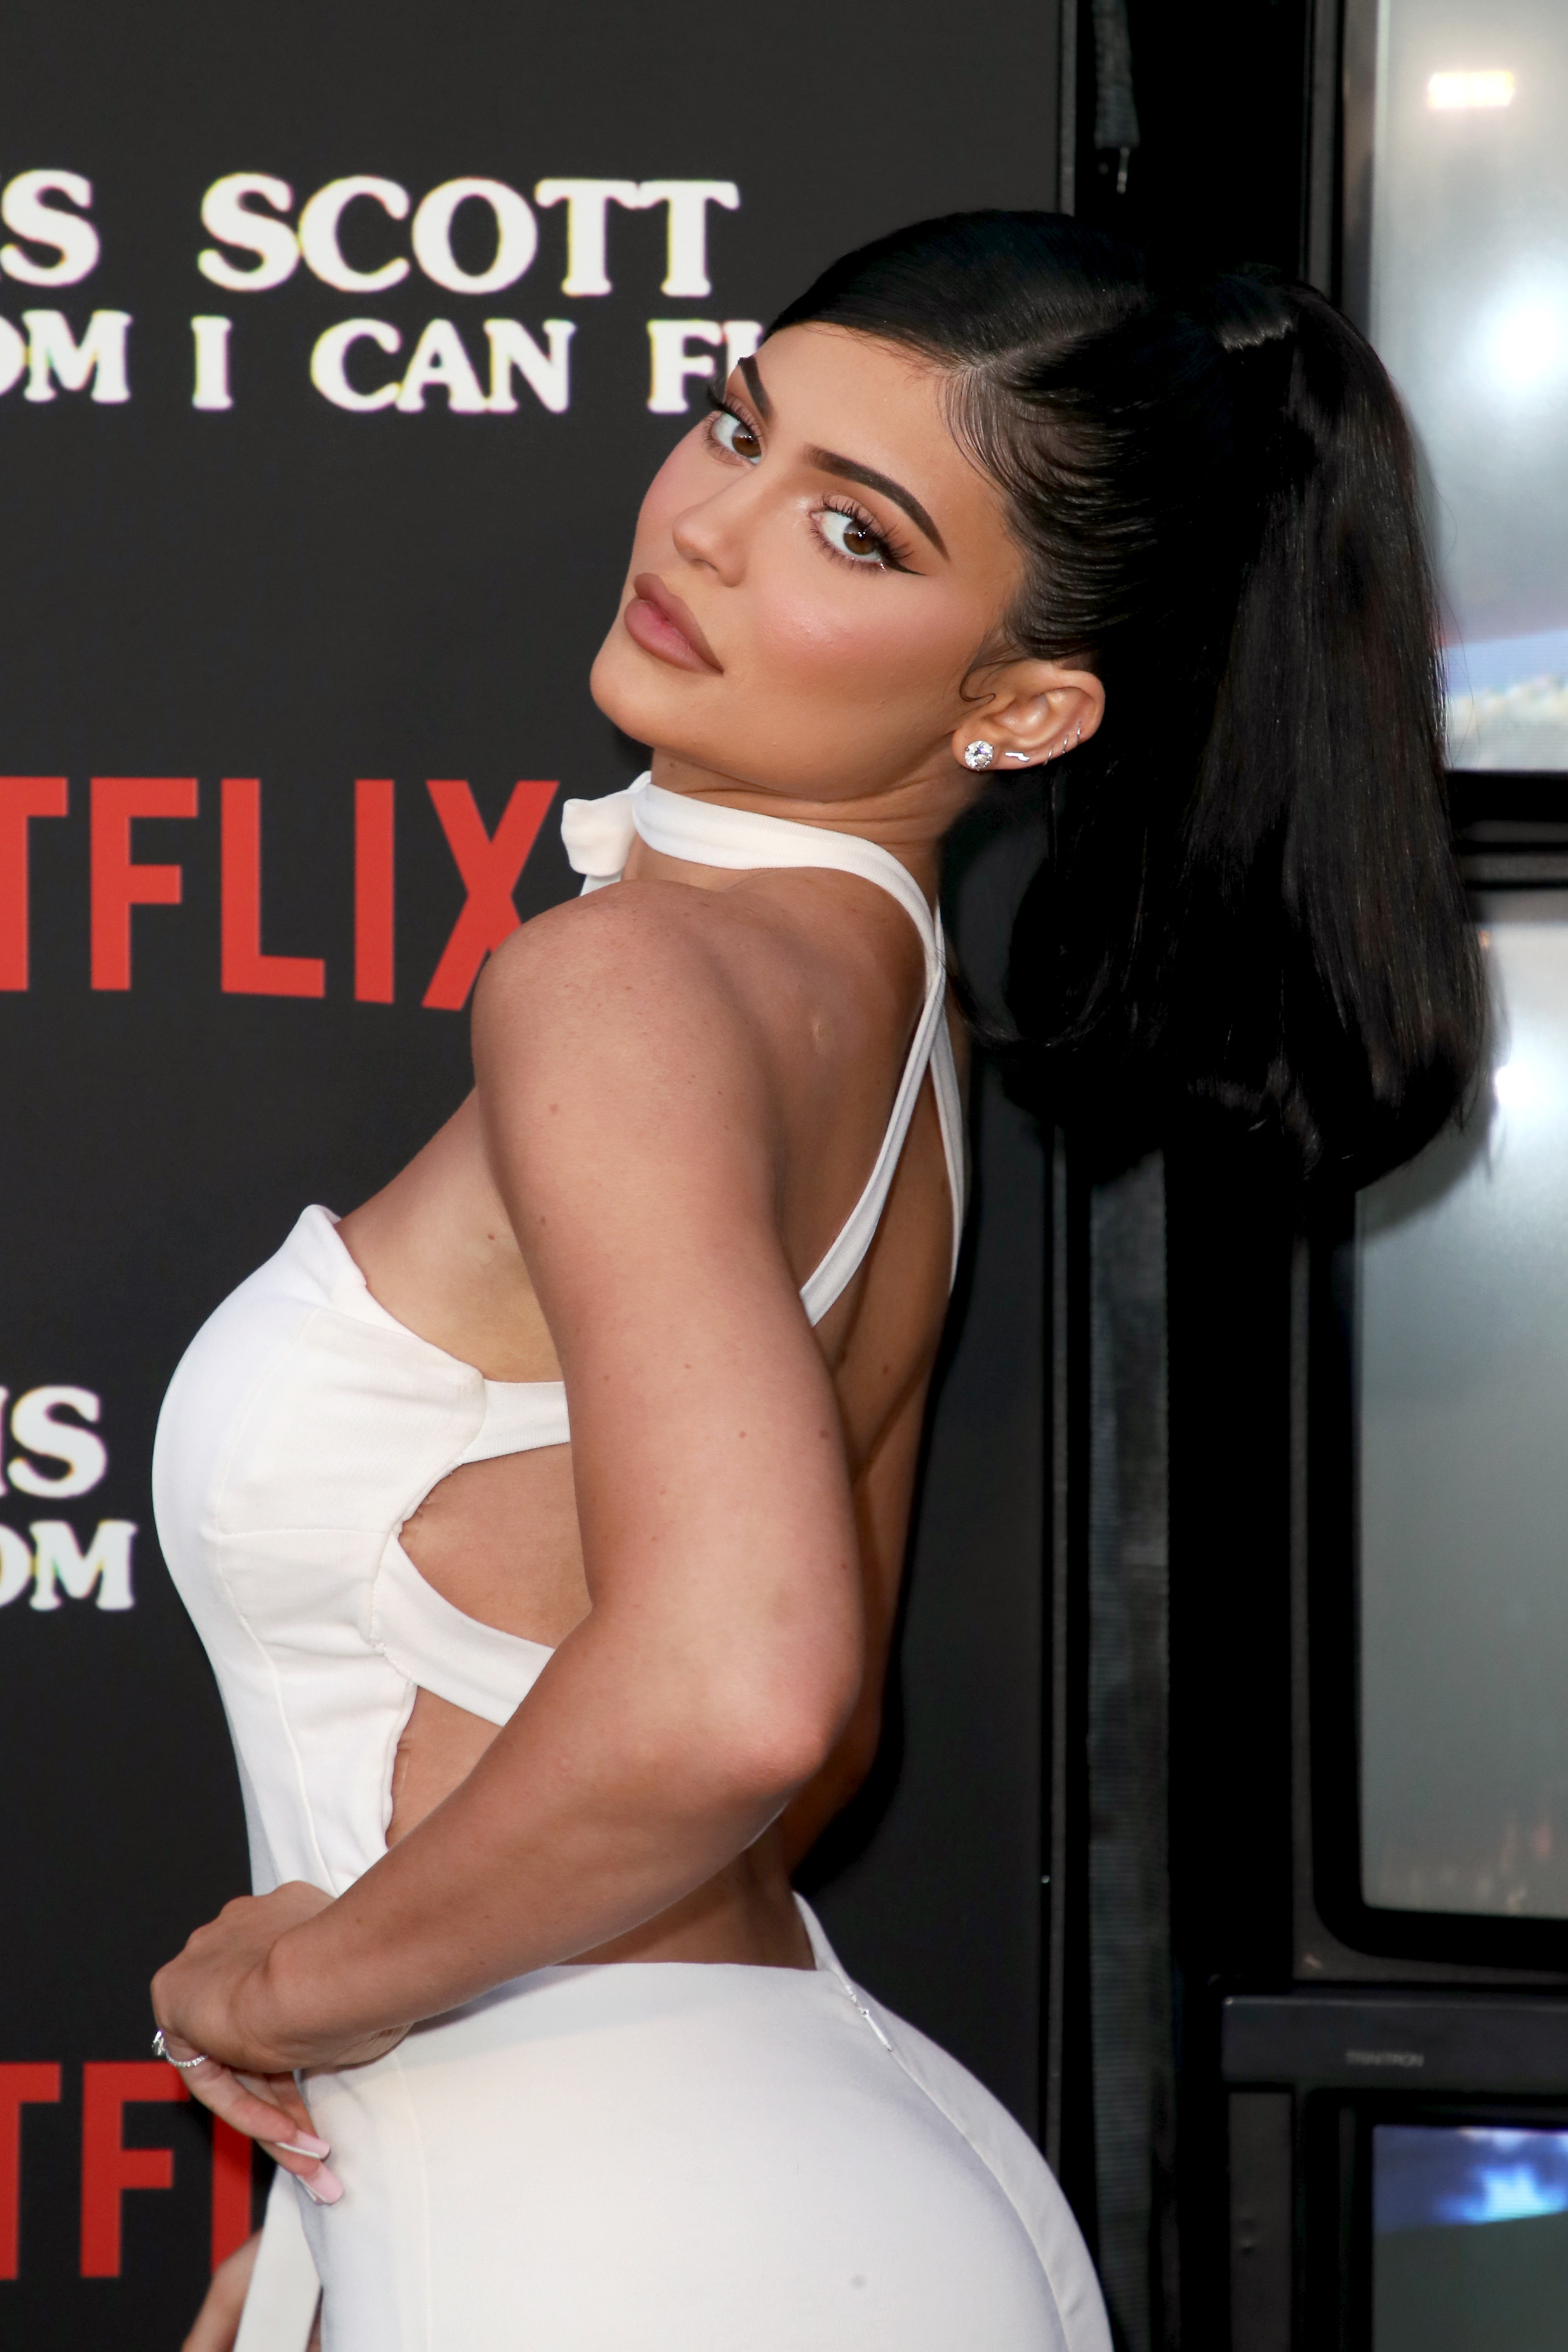 Kylie Jenner poses side-on in a dress with a high ponytail at an event